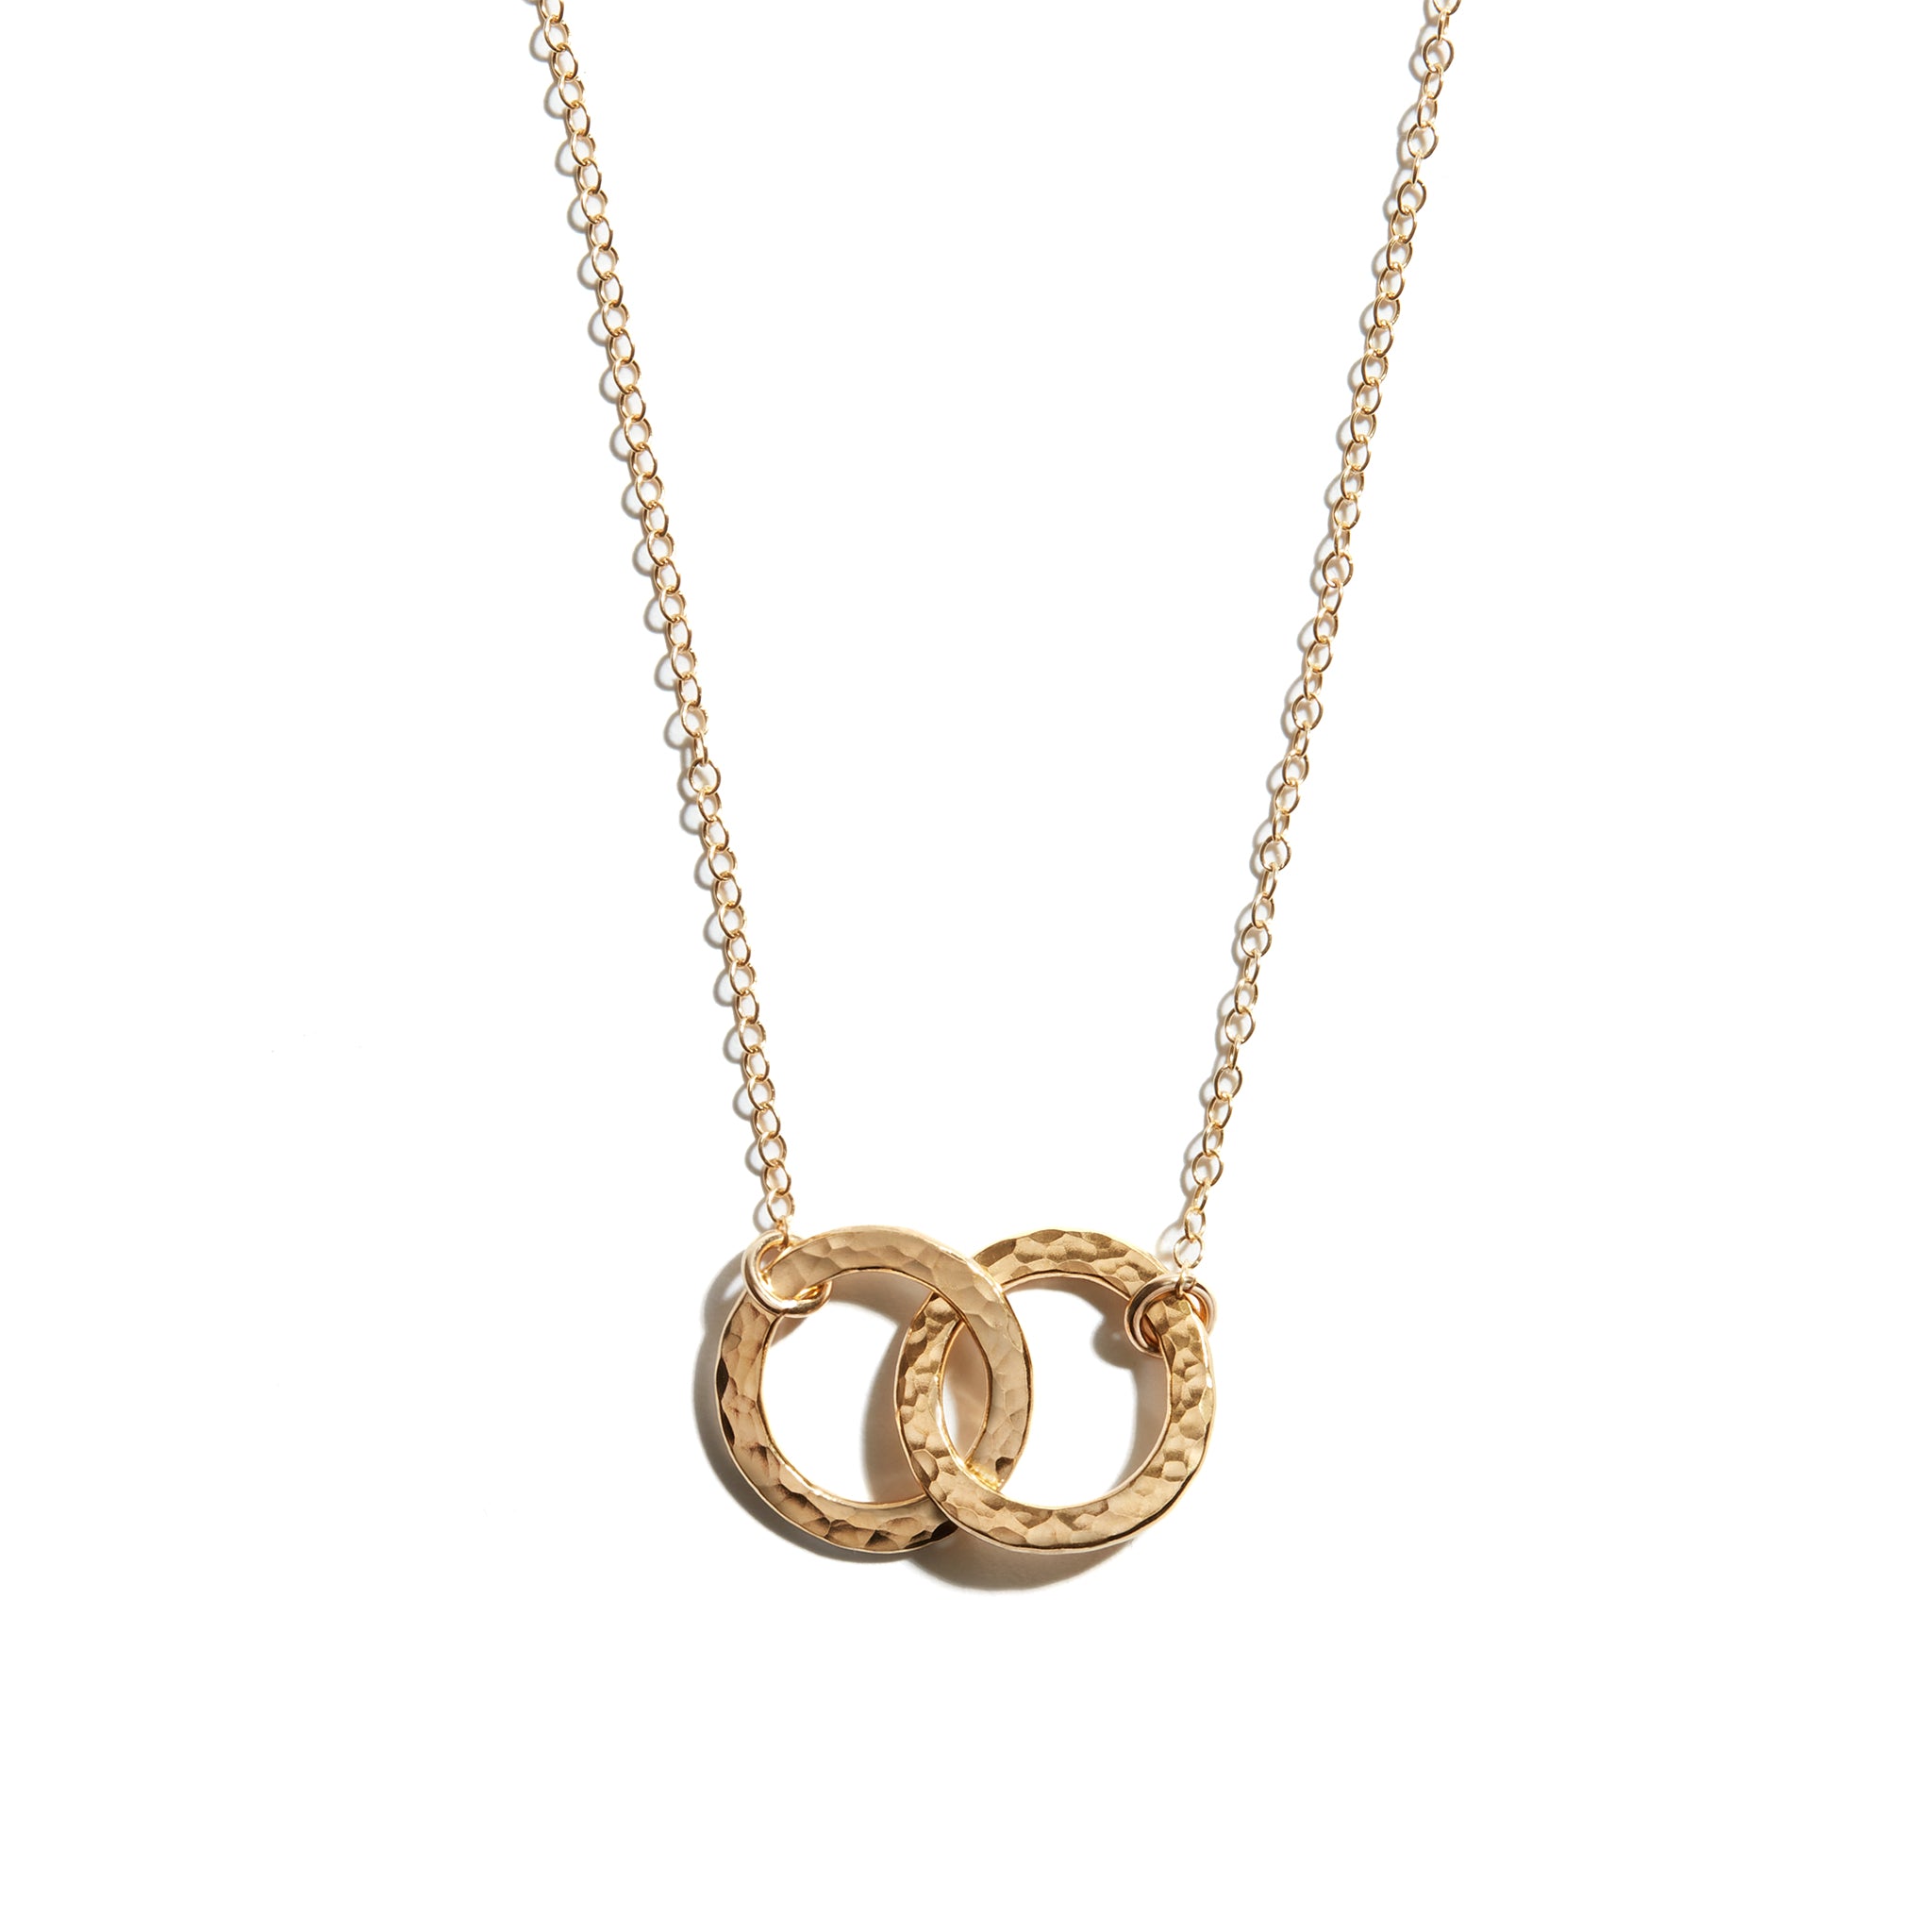 Photo of a double circle necklace crafted from 14 carat gold fill. This elegant piece makes the perfect gift for someone special.